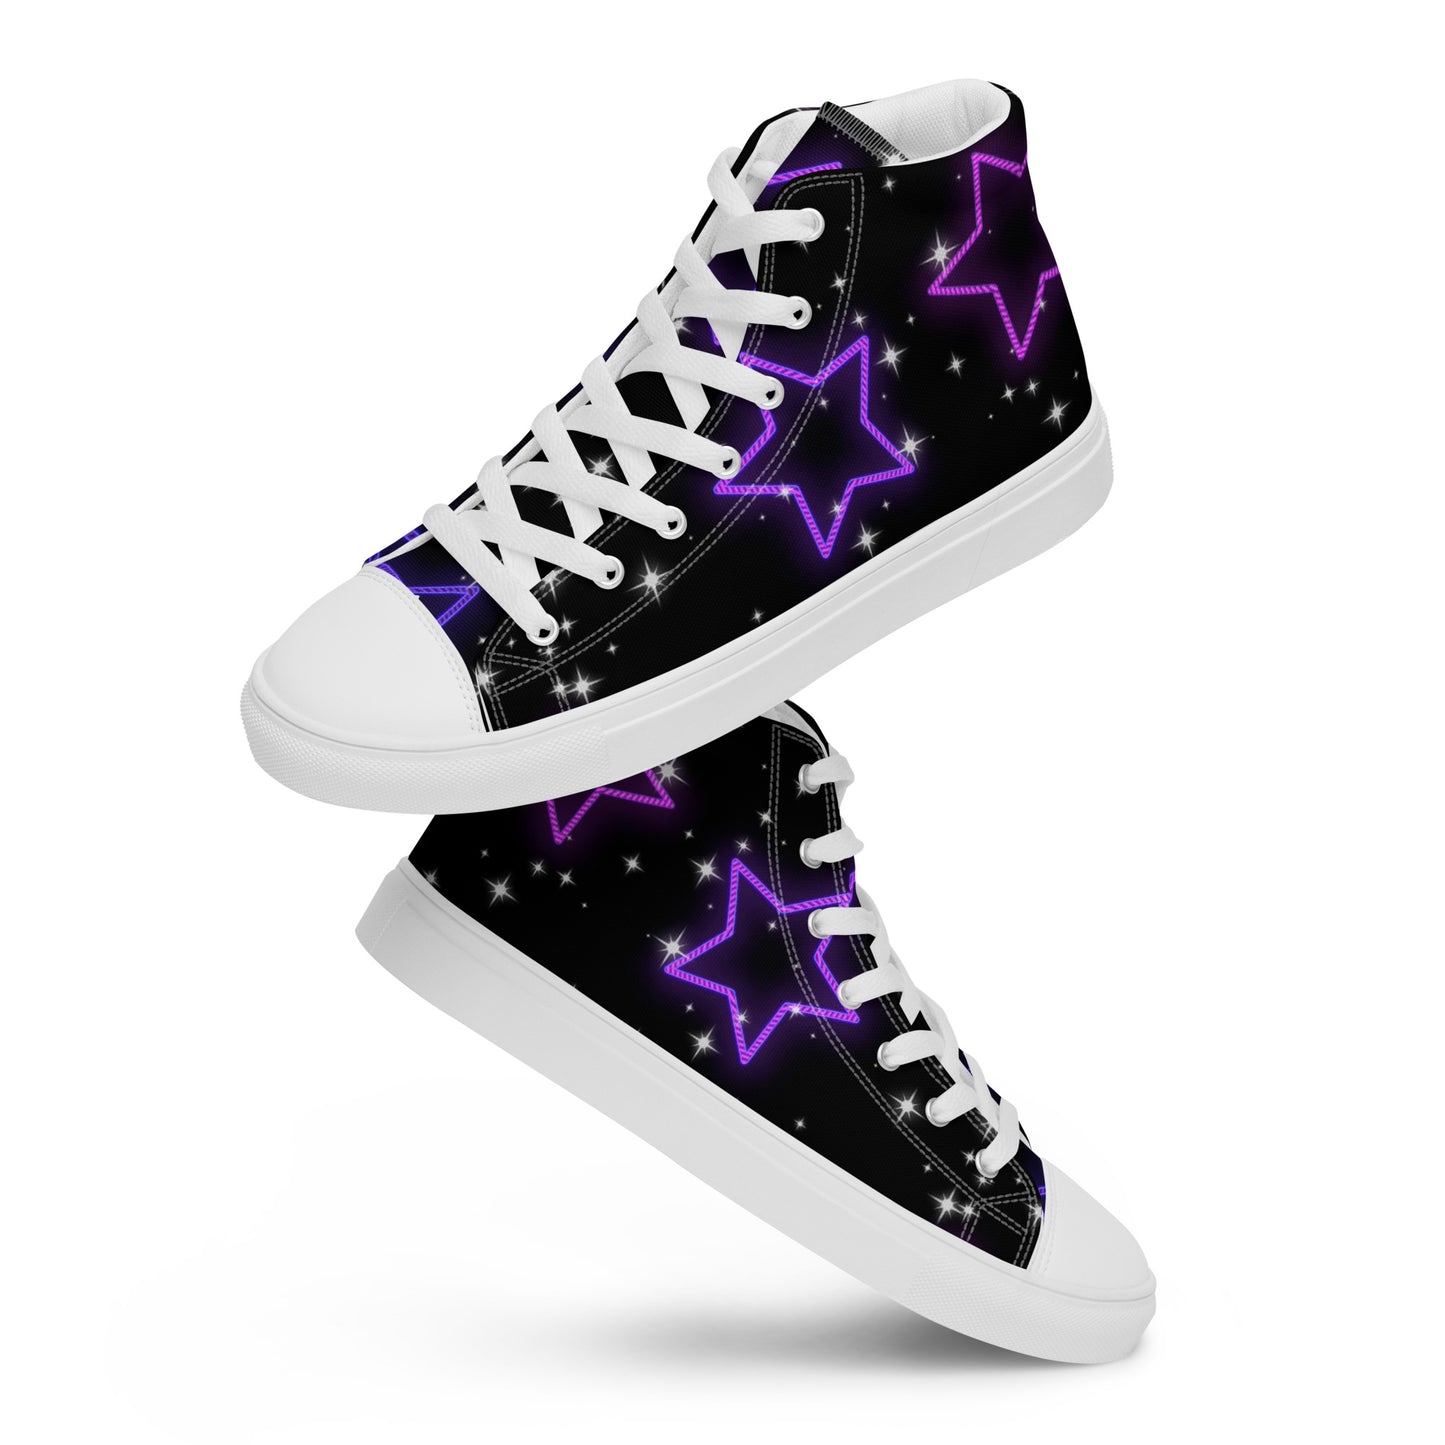 Neon Star Women’s High Top Canvas Shoes